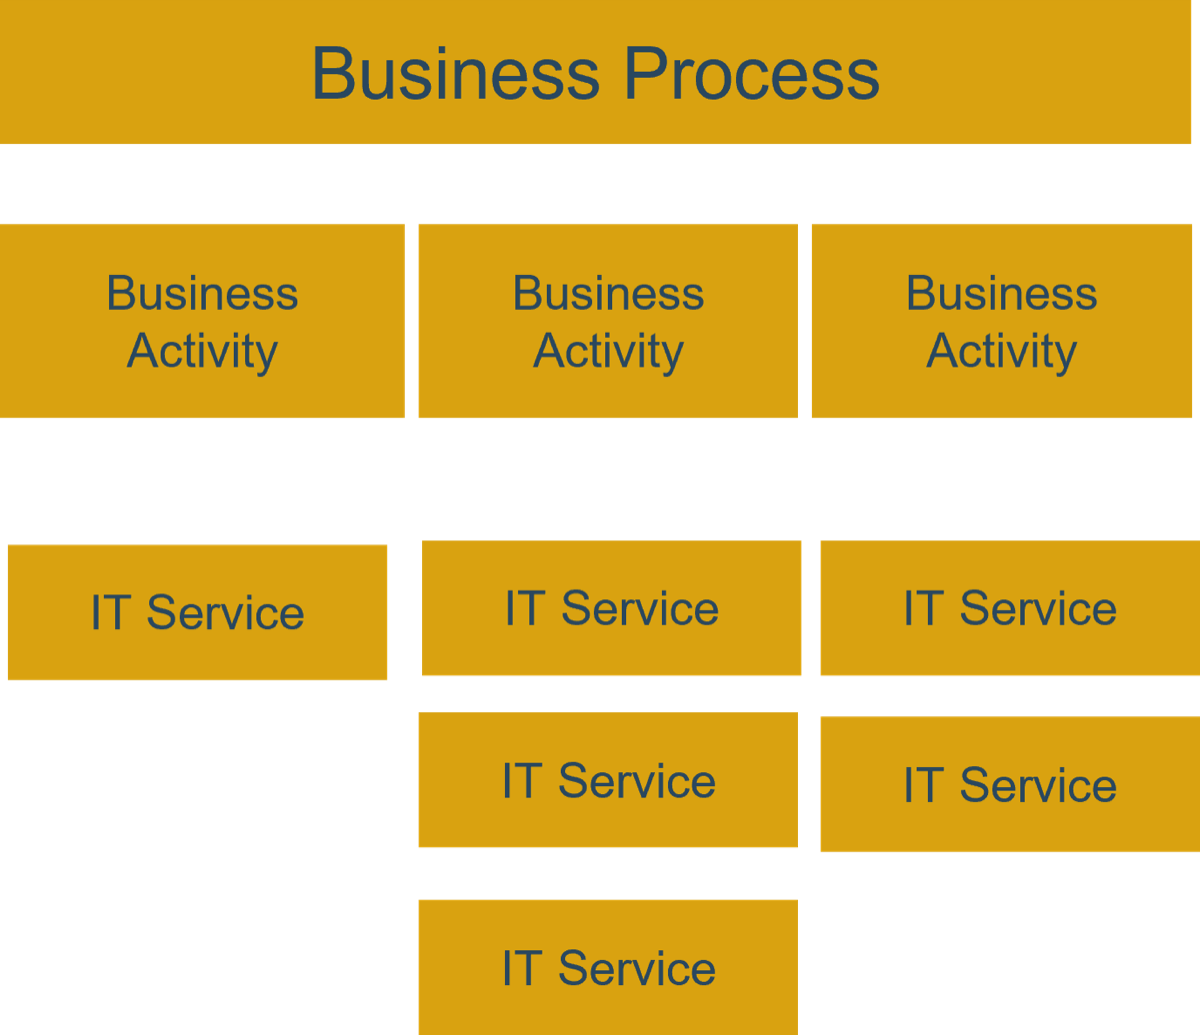 A 'Business Process' broken down to its parts, multiple 'Business Activities' and their 'IT Services'.